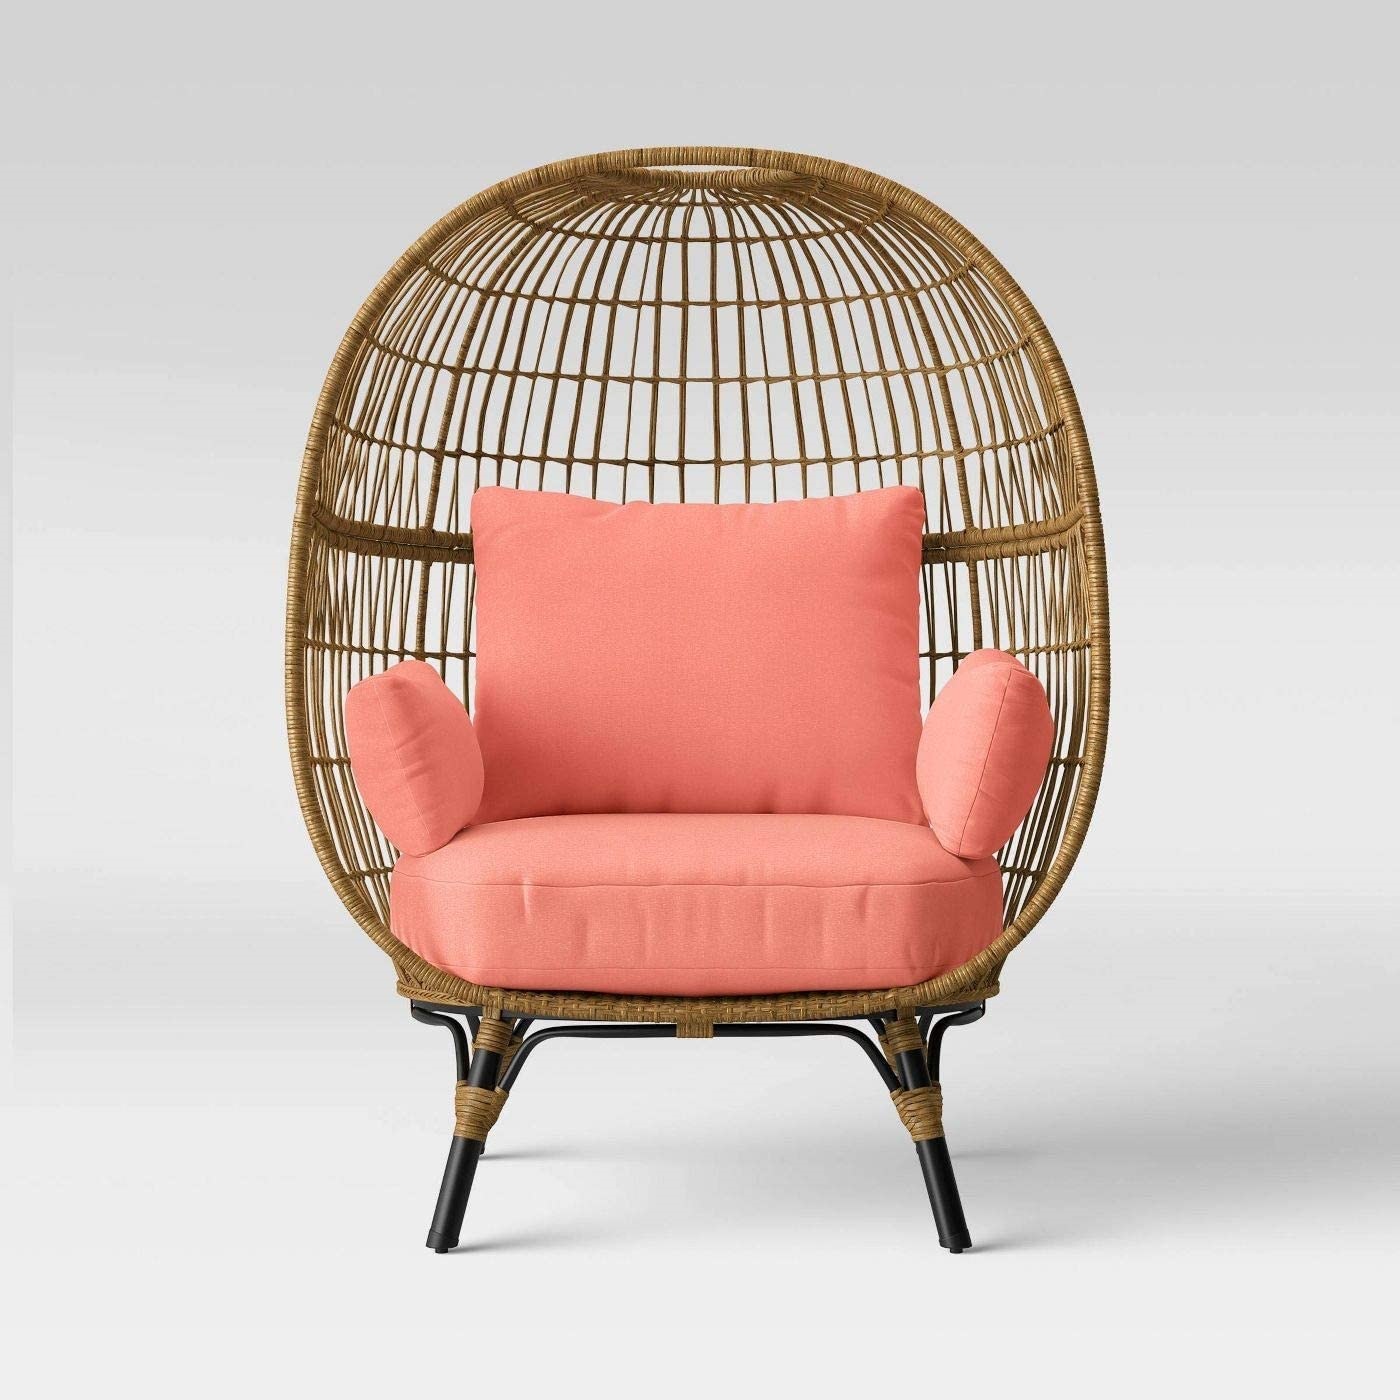 The 10 Best Egg Chairs of 2022